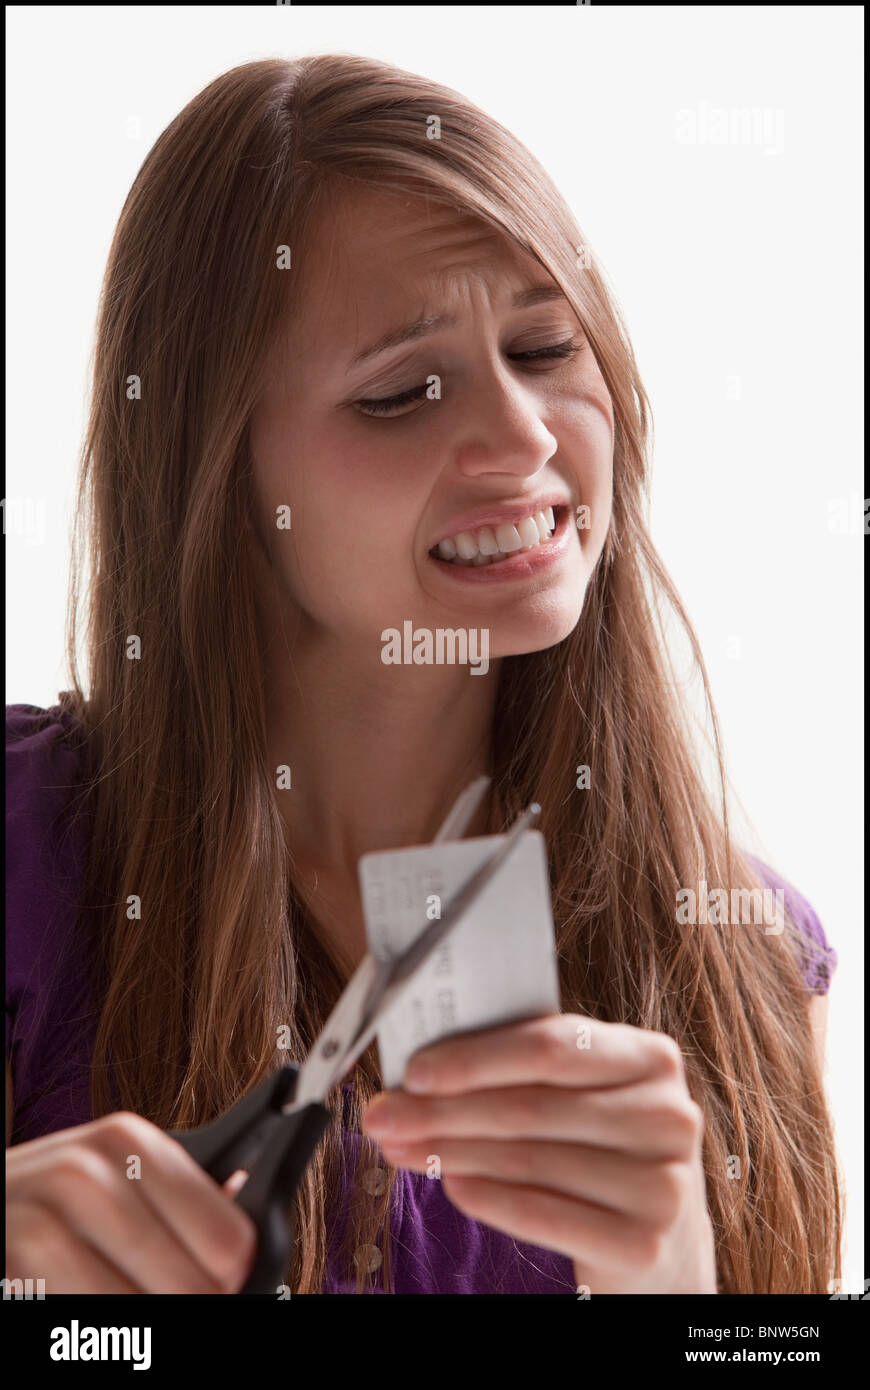 Woman reluctantly cutting her credit card Stock Photo